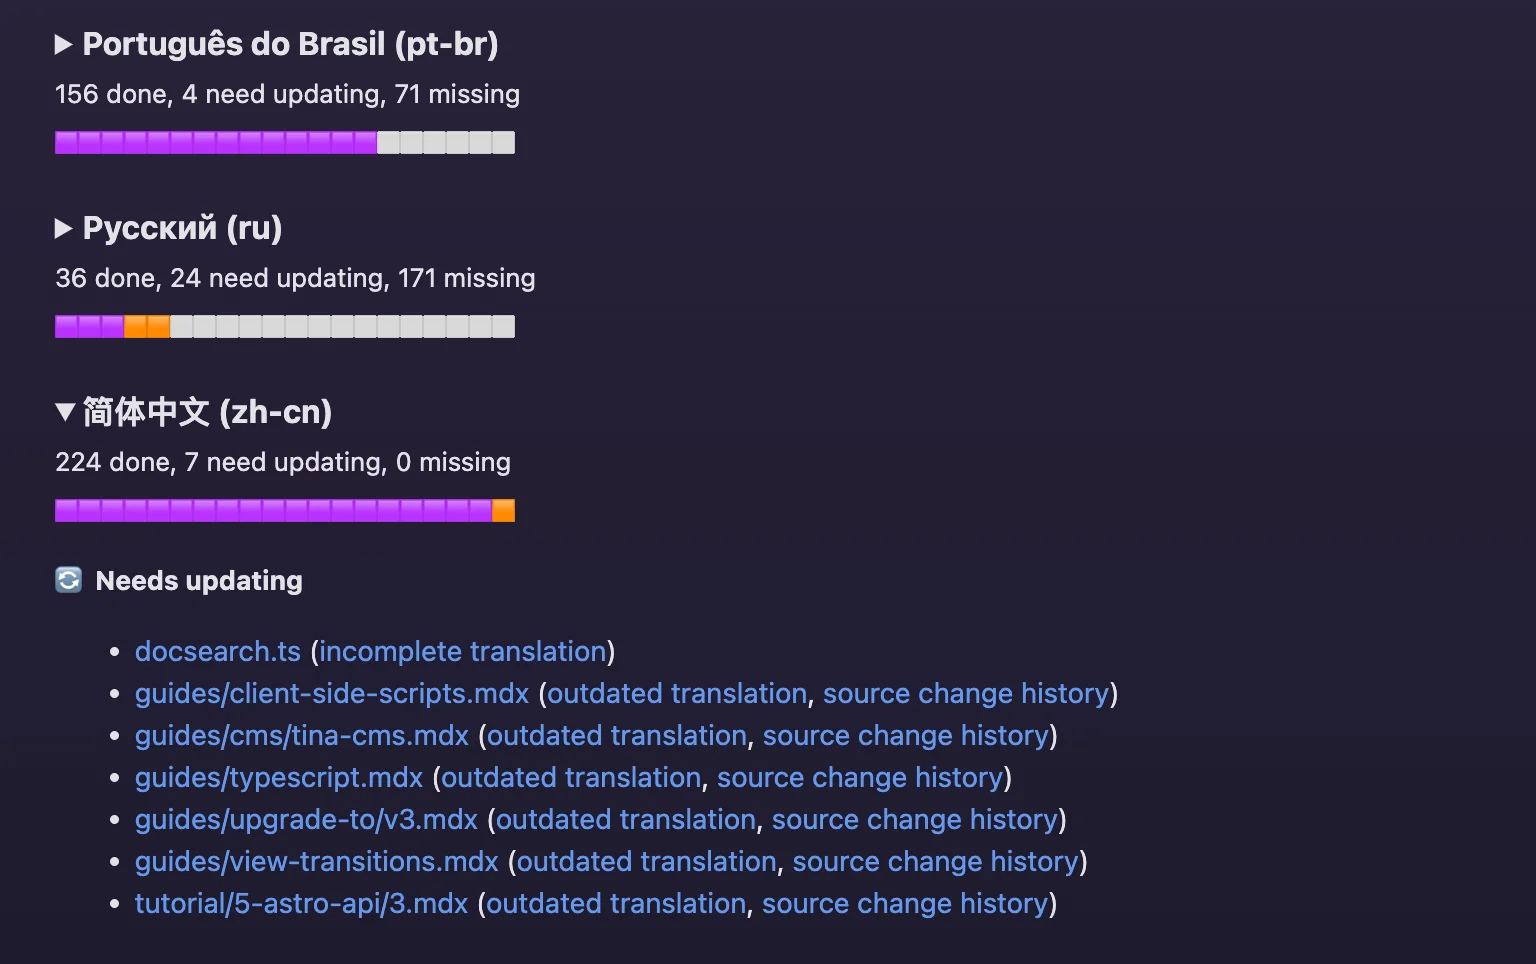 A small selection of the Translation Tracker's summary by language, showing one language expanded to list the translations needed for that language.